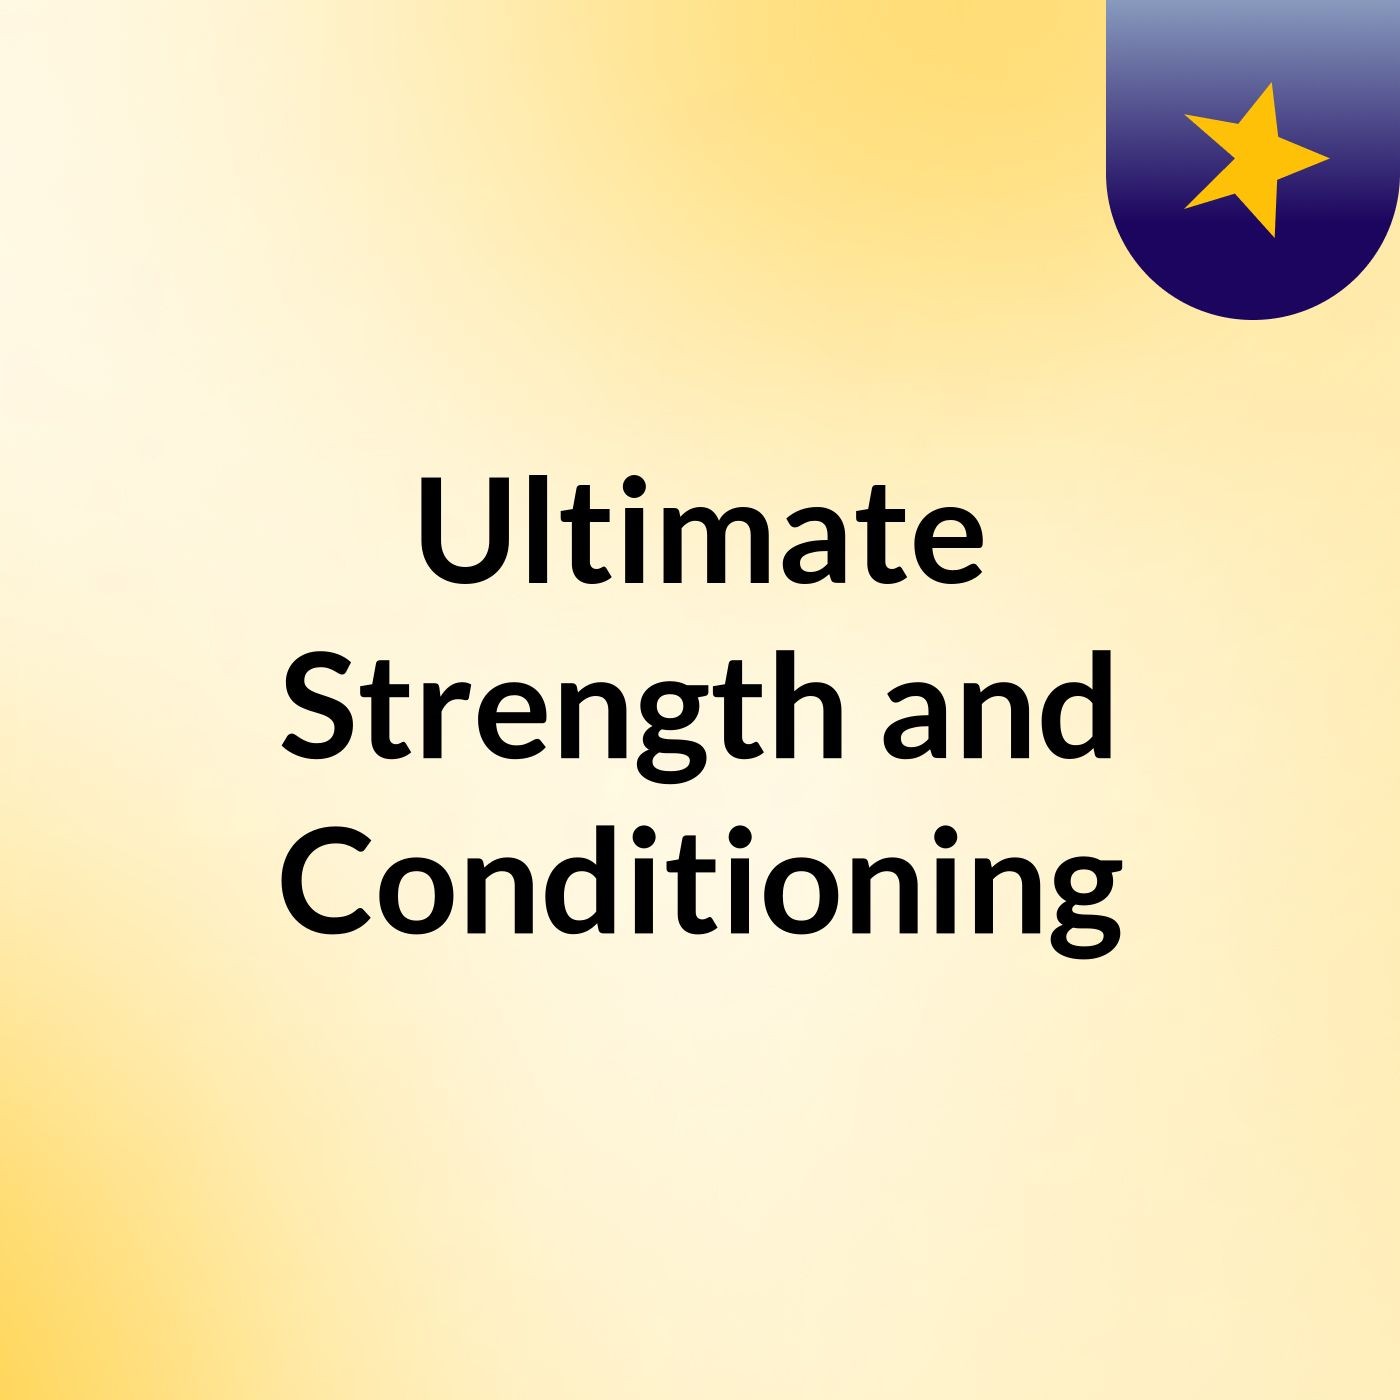 Ultimate Strength and Conditioning